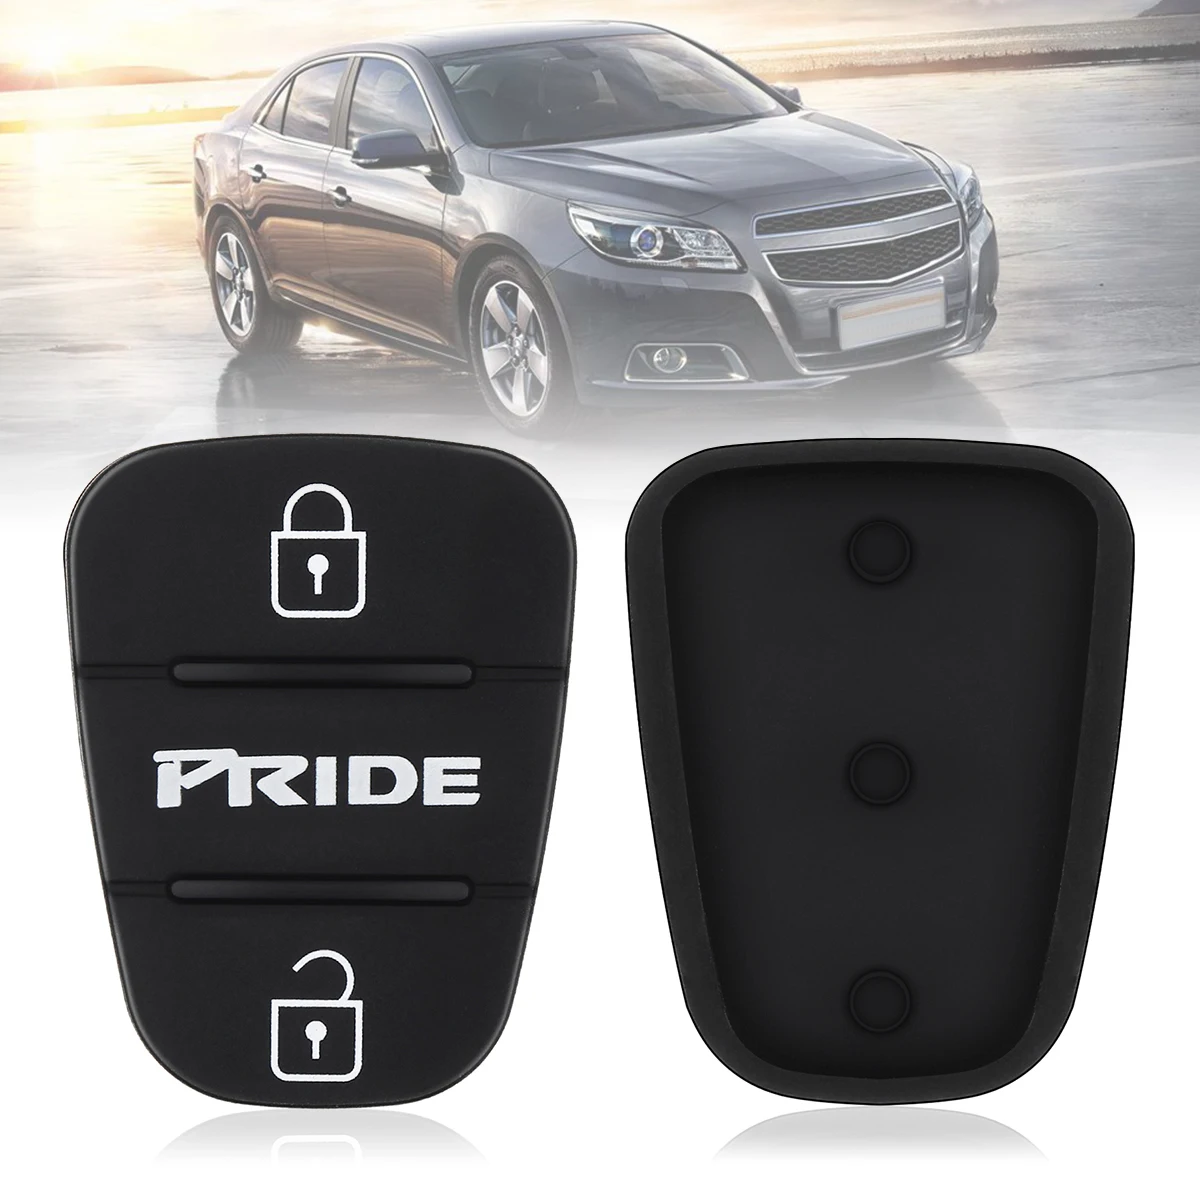 

3 Buttons Rubber Pad Insert Replacement Fit for Ceed Hyundai Solaris Accent Tucson l10 l20 l30 Kia Rio Flip Remote Car Key Shell